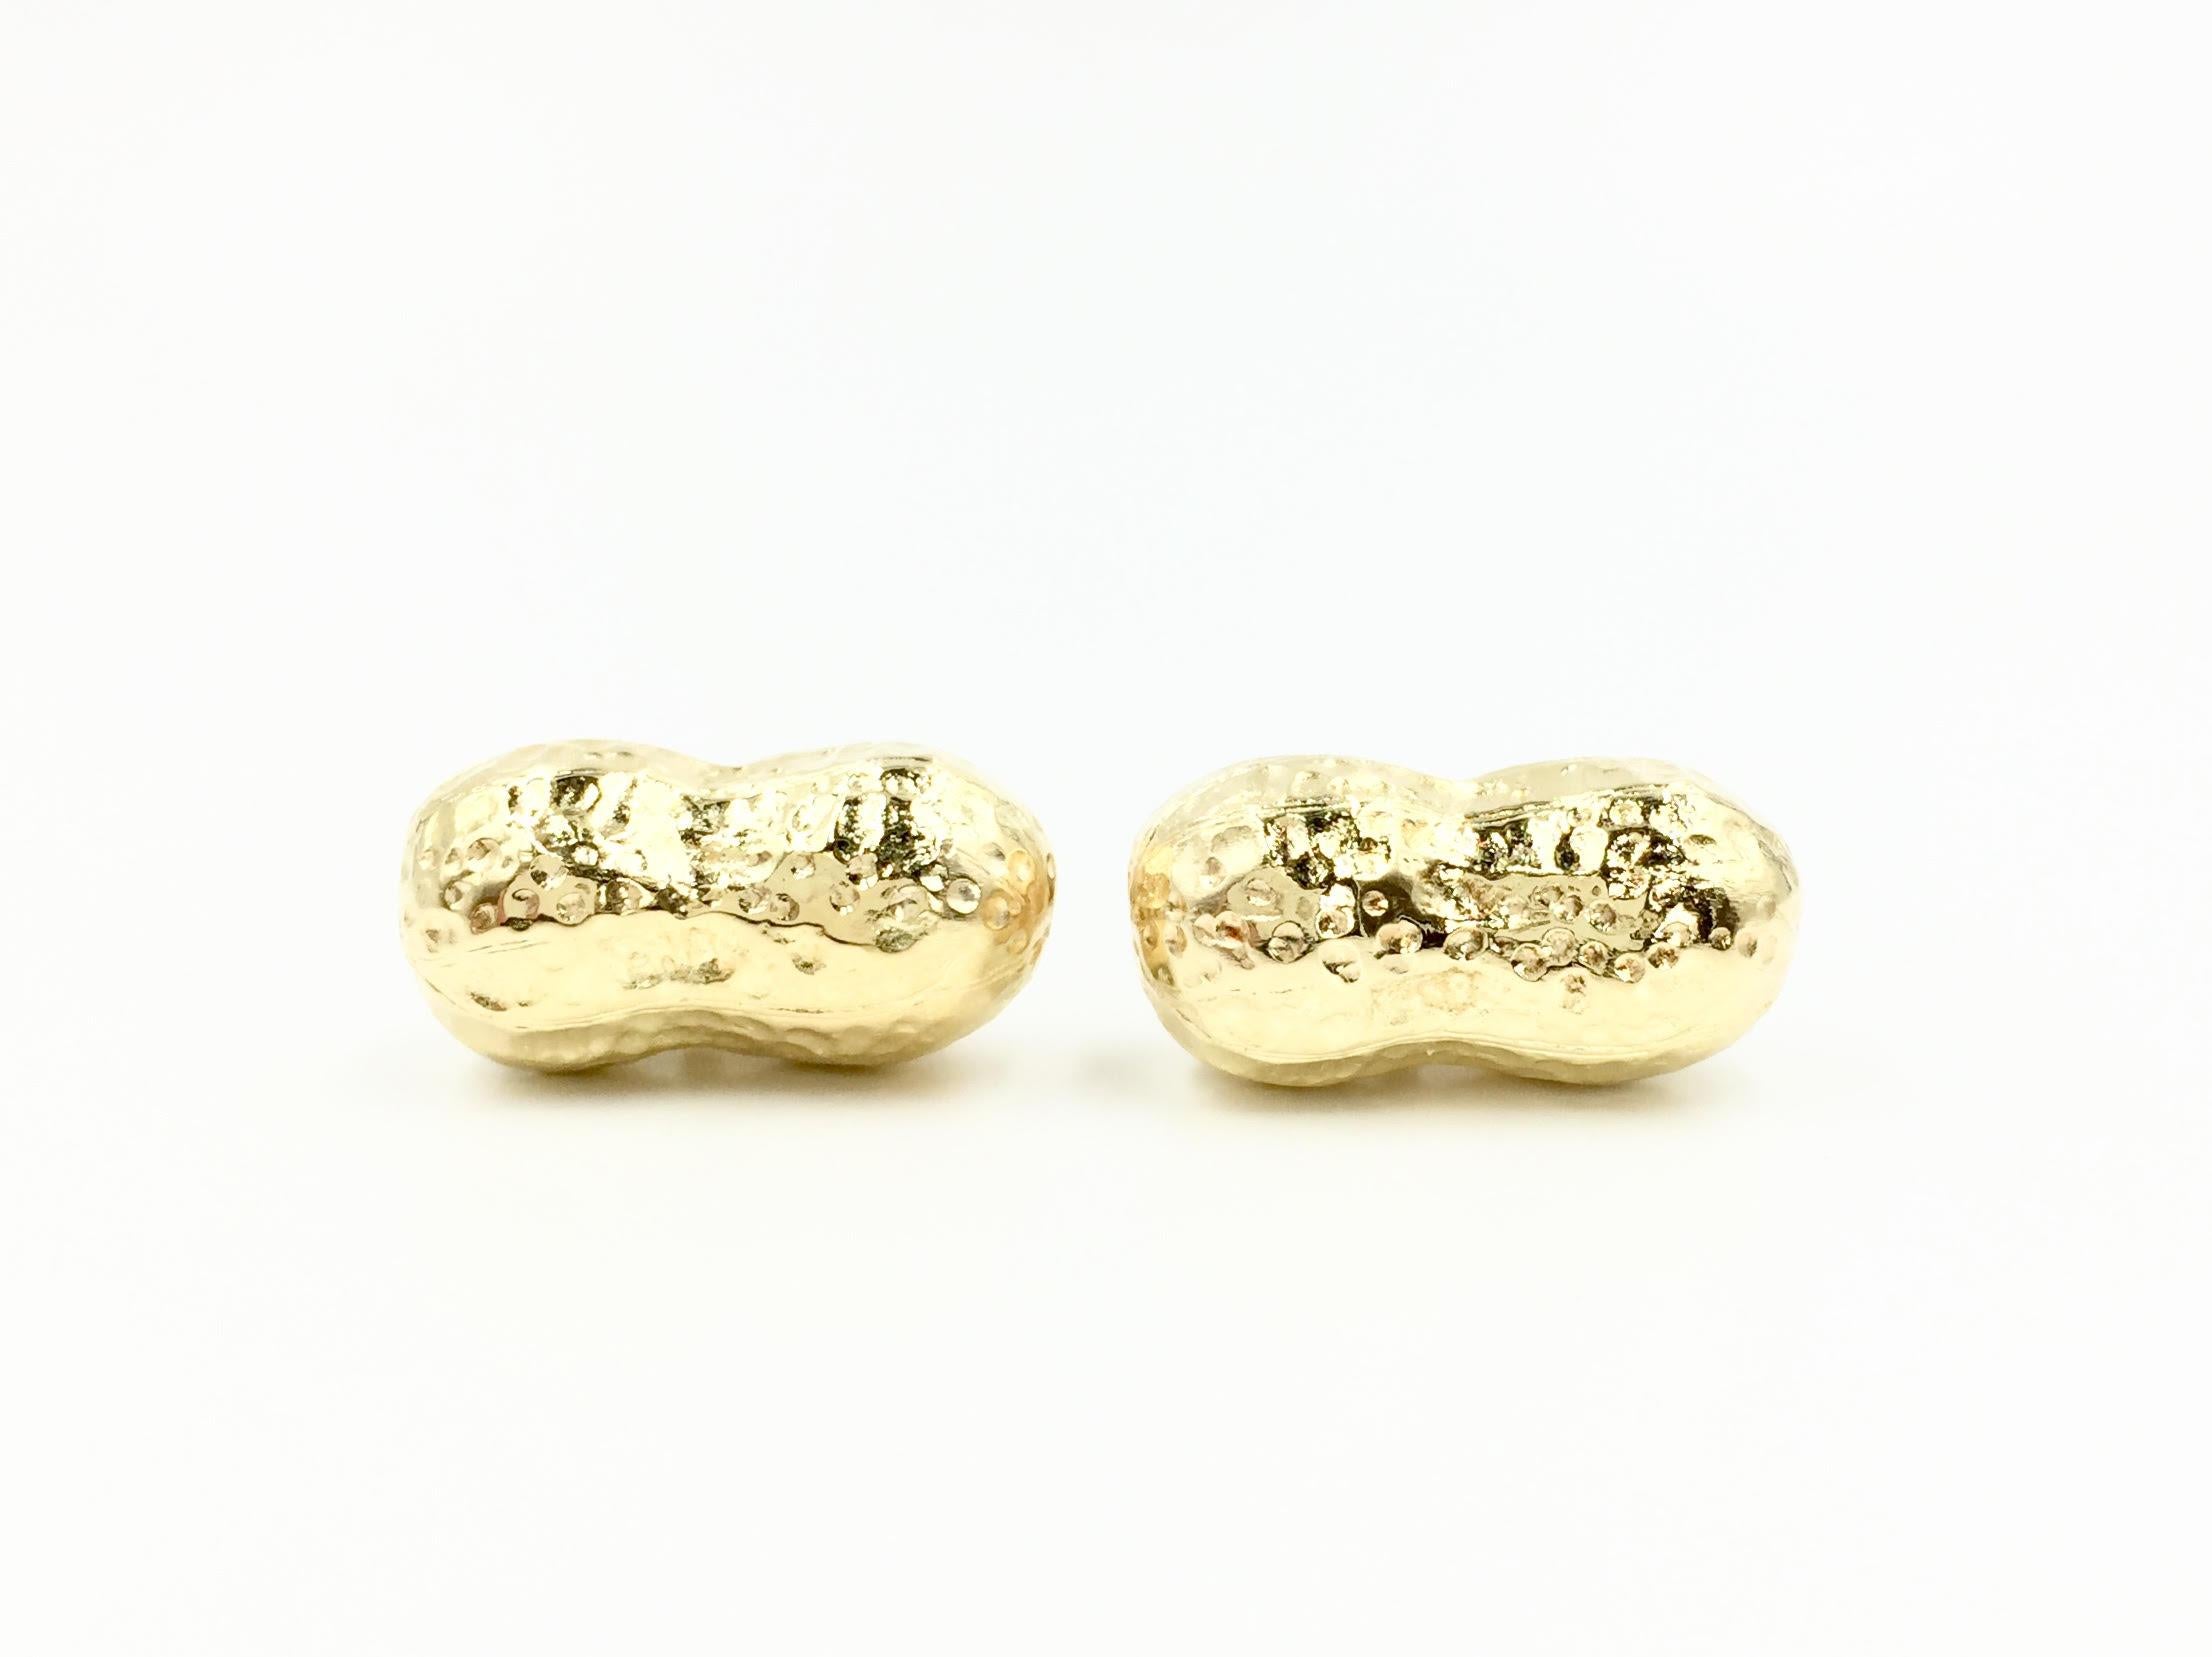 Designed by Louis Tamis & Sons in 1998, these hand crafted solid 18 karat yellow gold peanut cuff links are fun while making a subtle statement. Incredible design, they truly look like actual peanuts dipped in gold. Polished hinge style